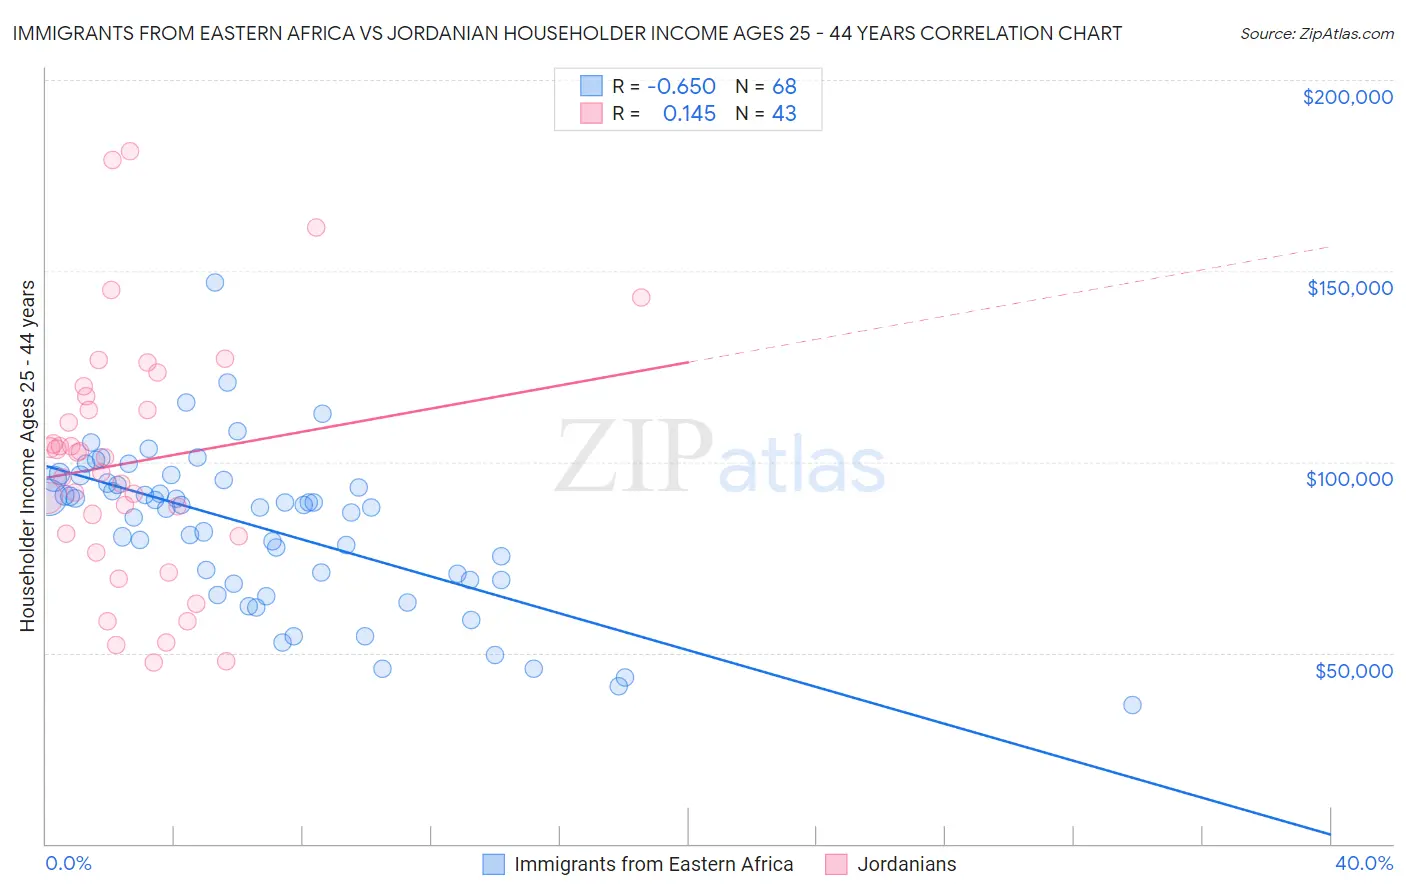 Immigrants from Eastern Africa vs Jordanian Householder Income Ages 25 - 44 years